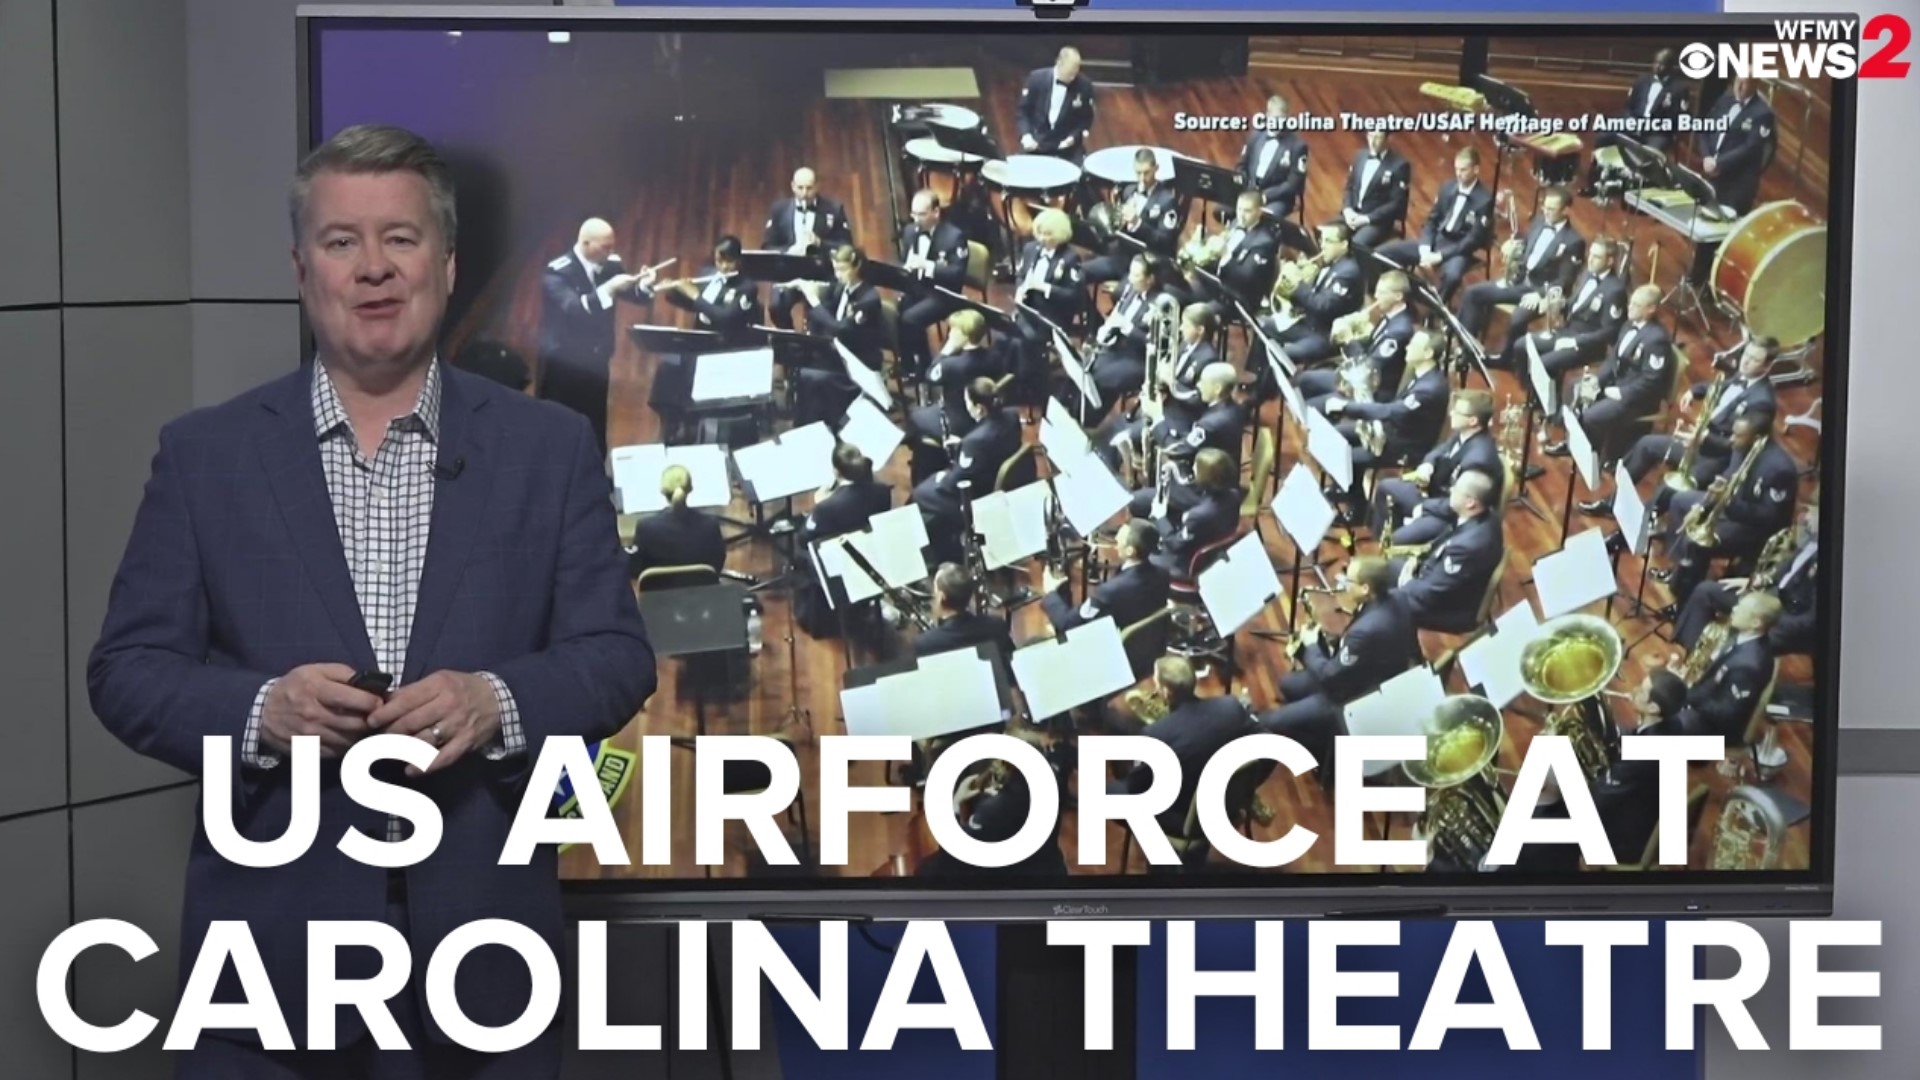 The United States Airforce band will play a free concert at Carolina Theatre.